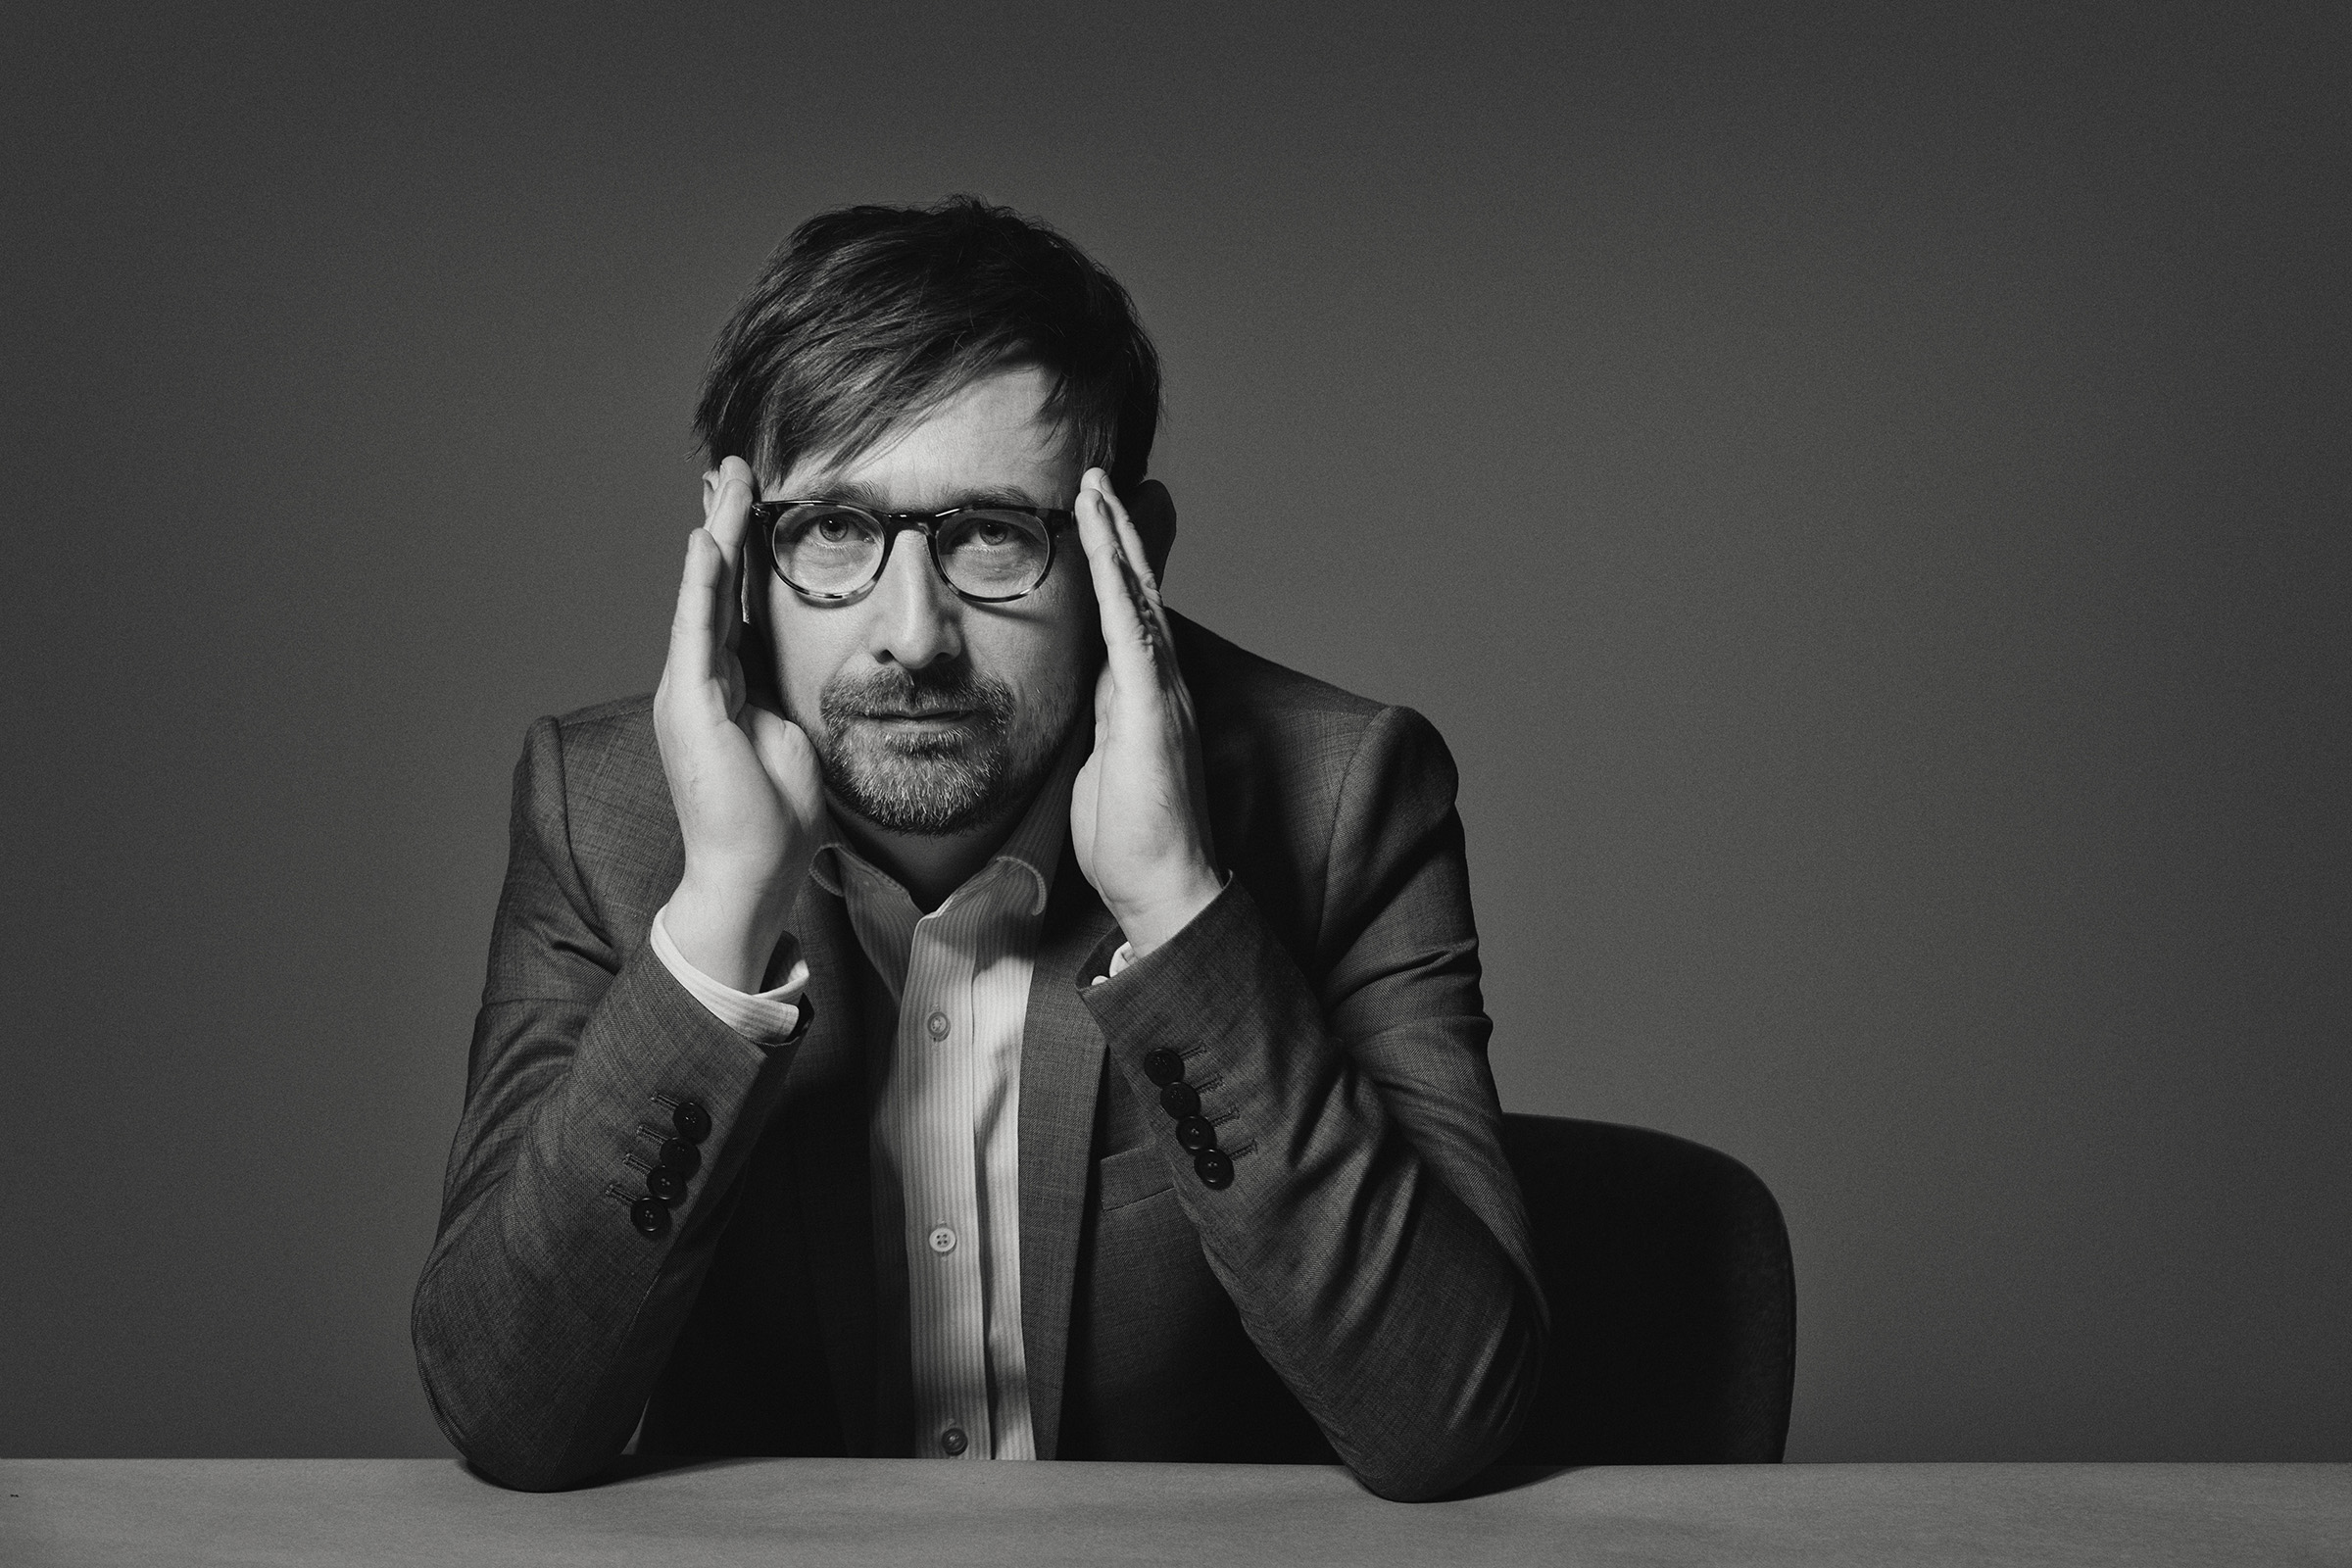 THE DIVINE COMEDY announces 'Charmed Life - The Best Of The Divine Comedy' & Irish tour dates for Spring 2022 1